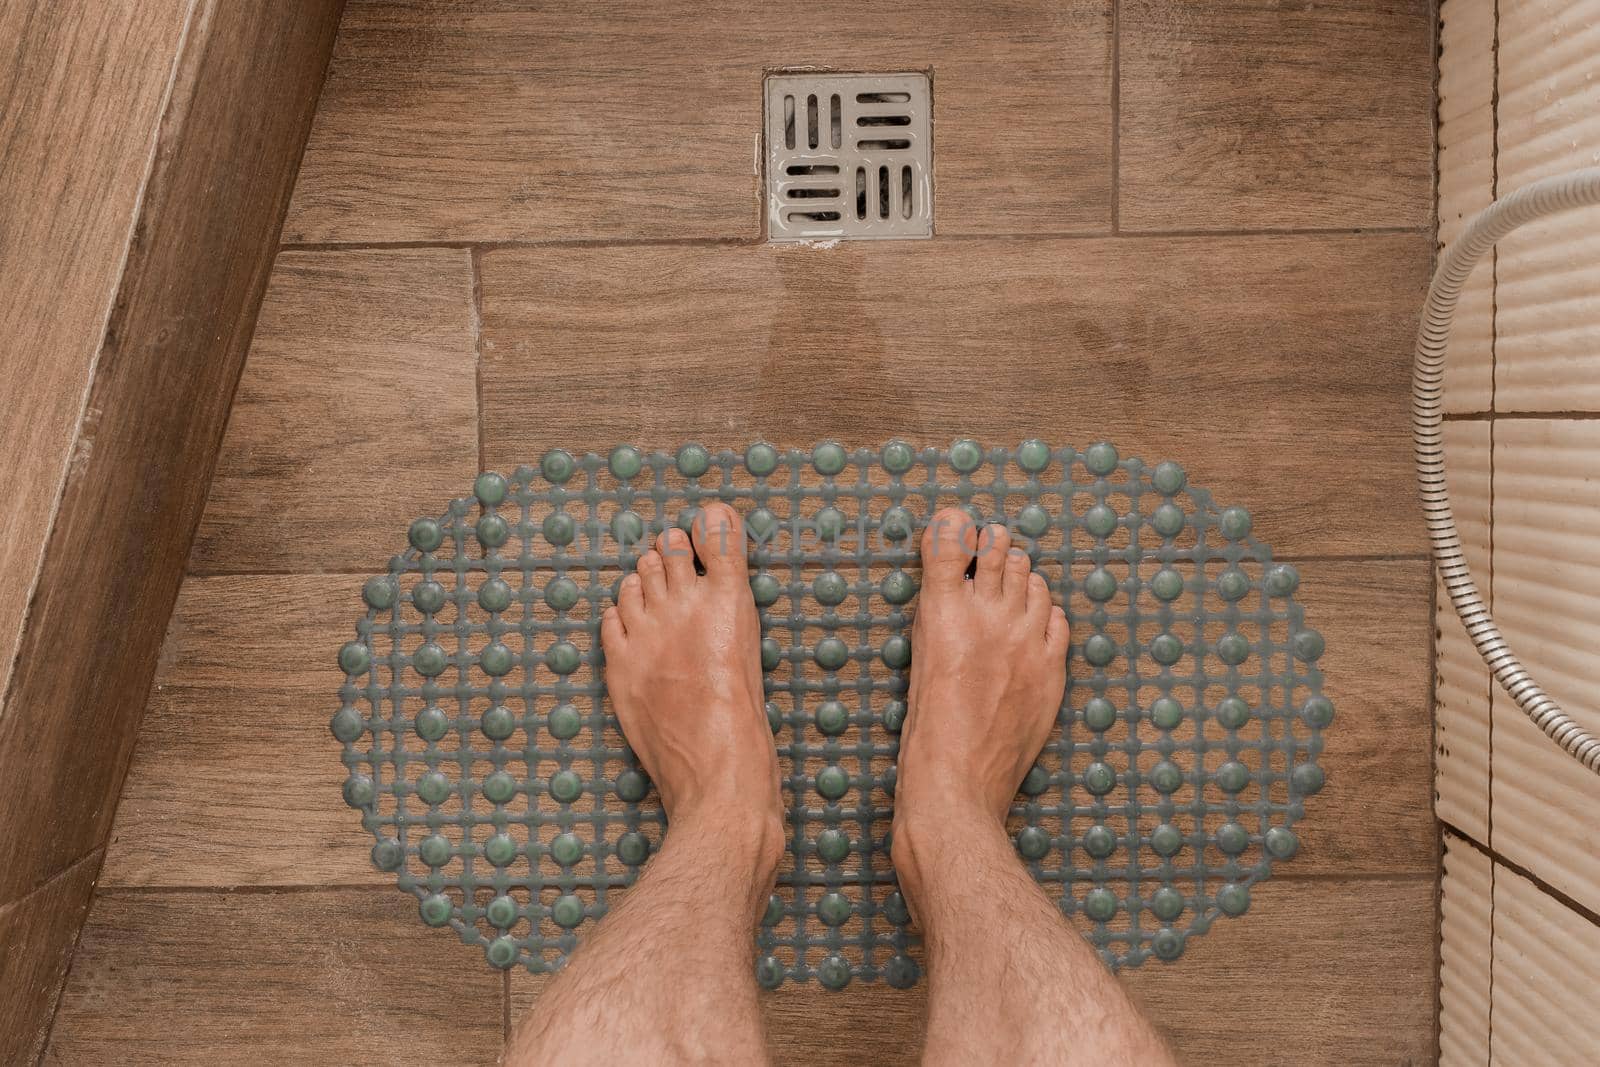 Men's feet stand on a plastic anti-slip mat next to the floor drain in the bathroom or shower by AYDO8